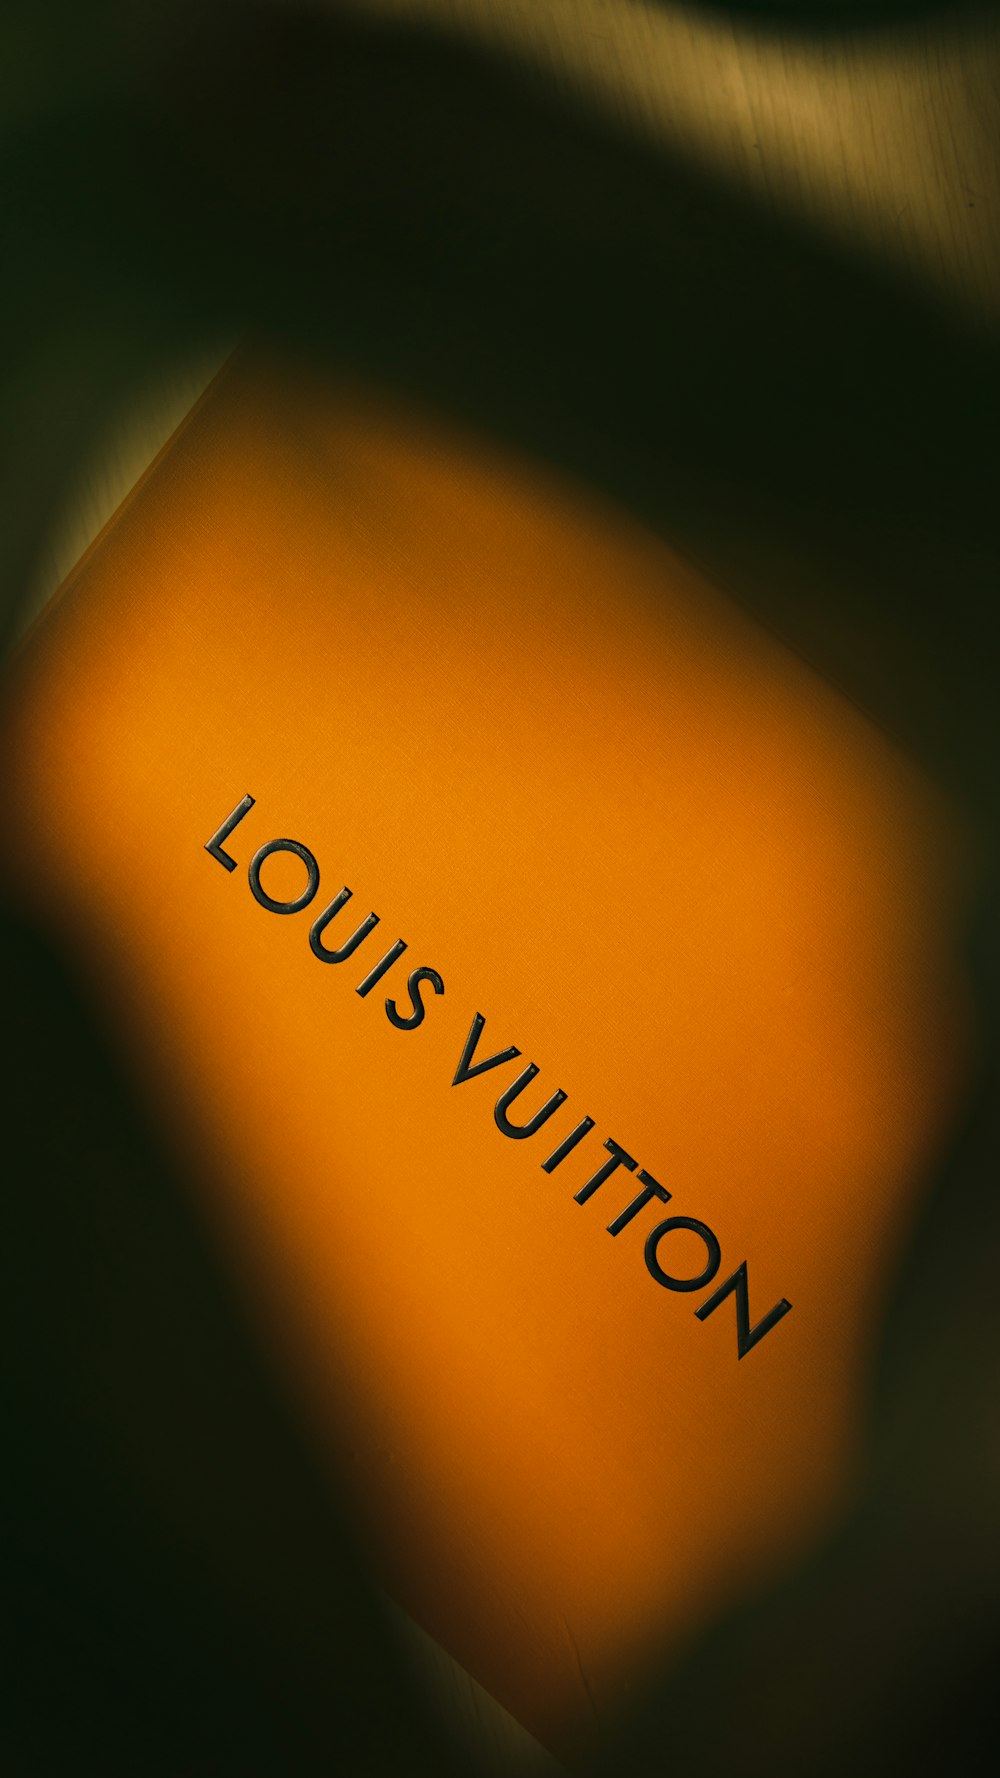 a close up of a book with the word louis vutton on it